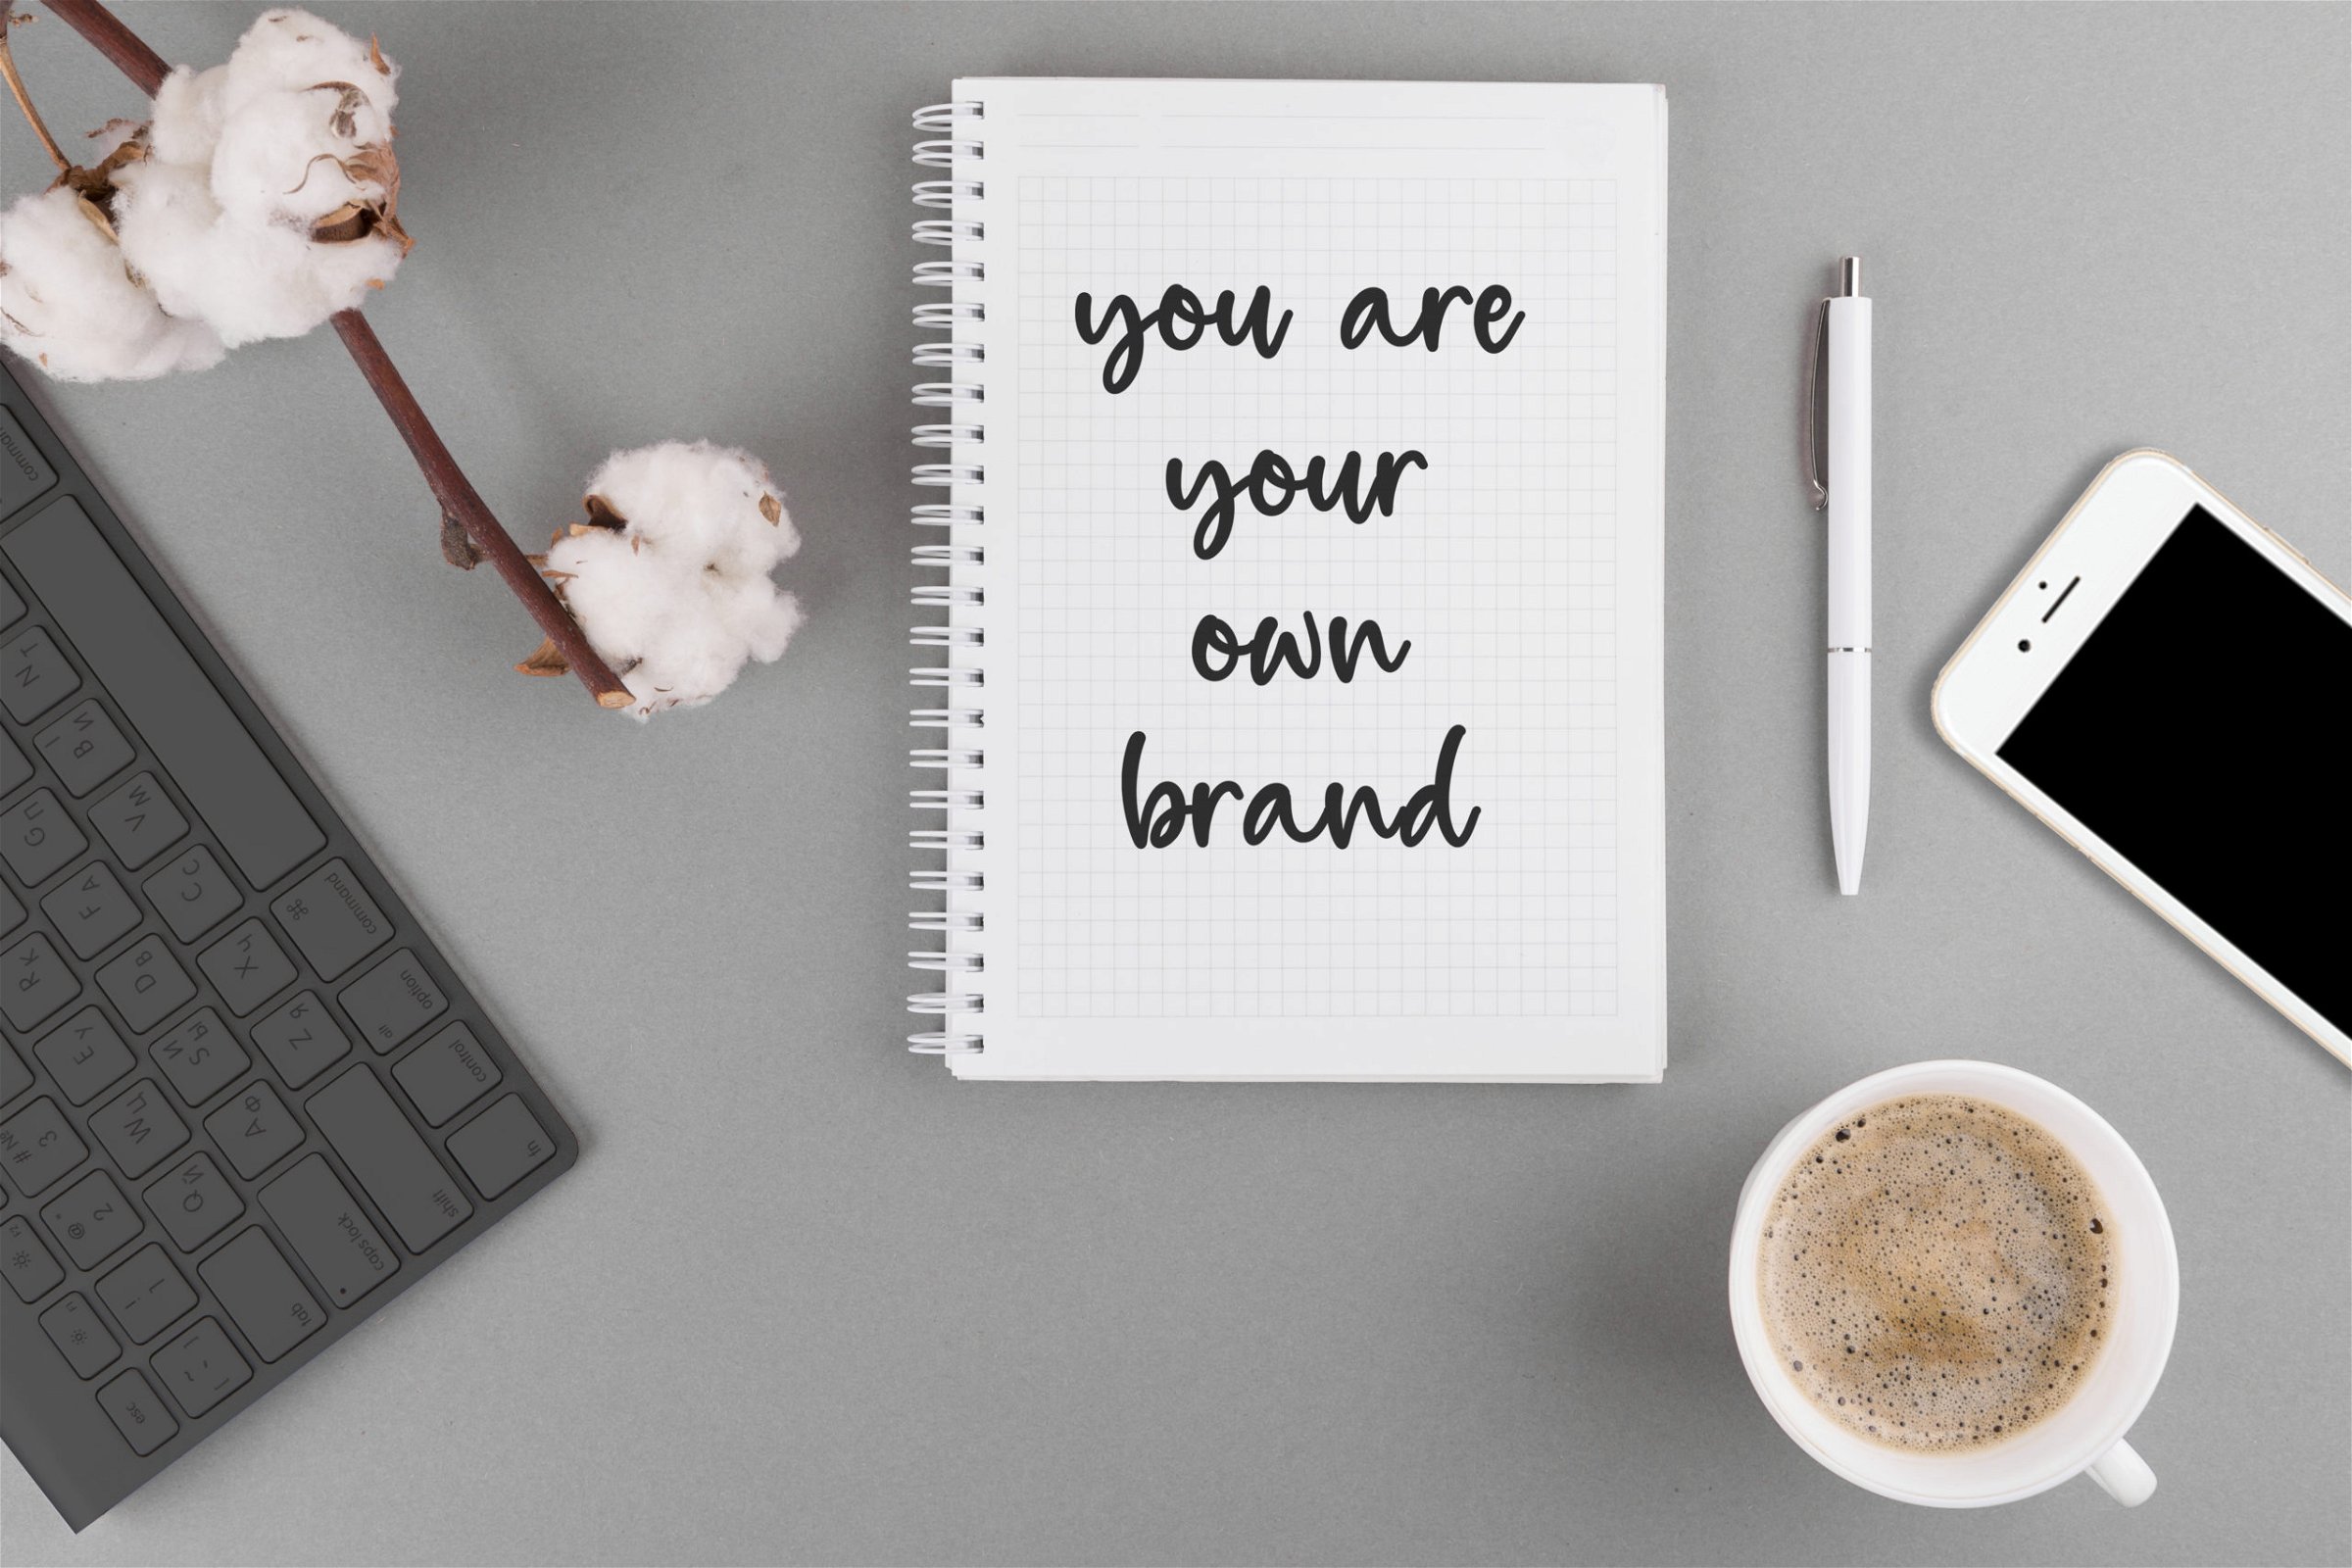 Personal Branding- It’s time for your own Identity